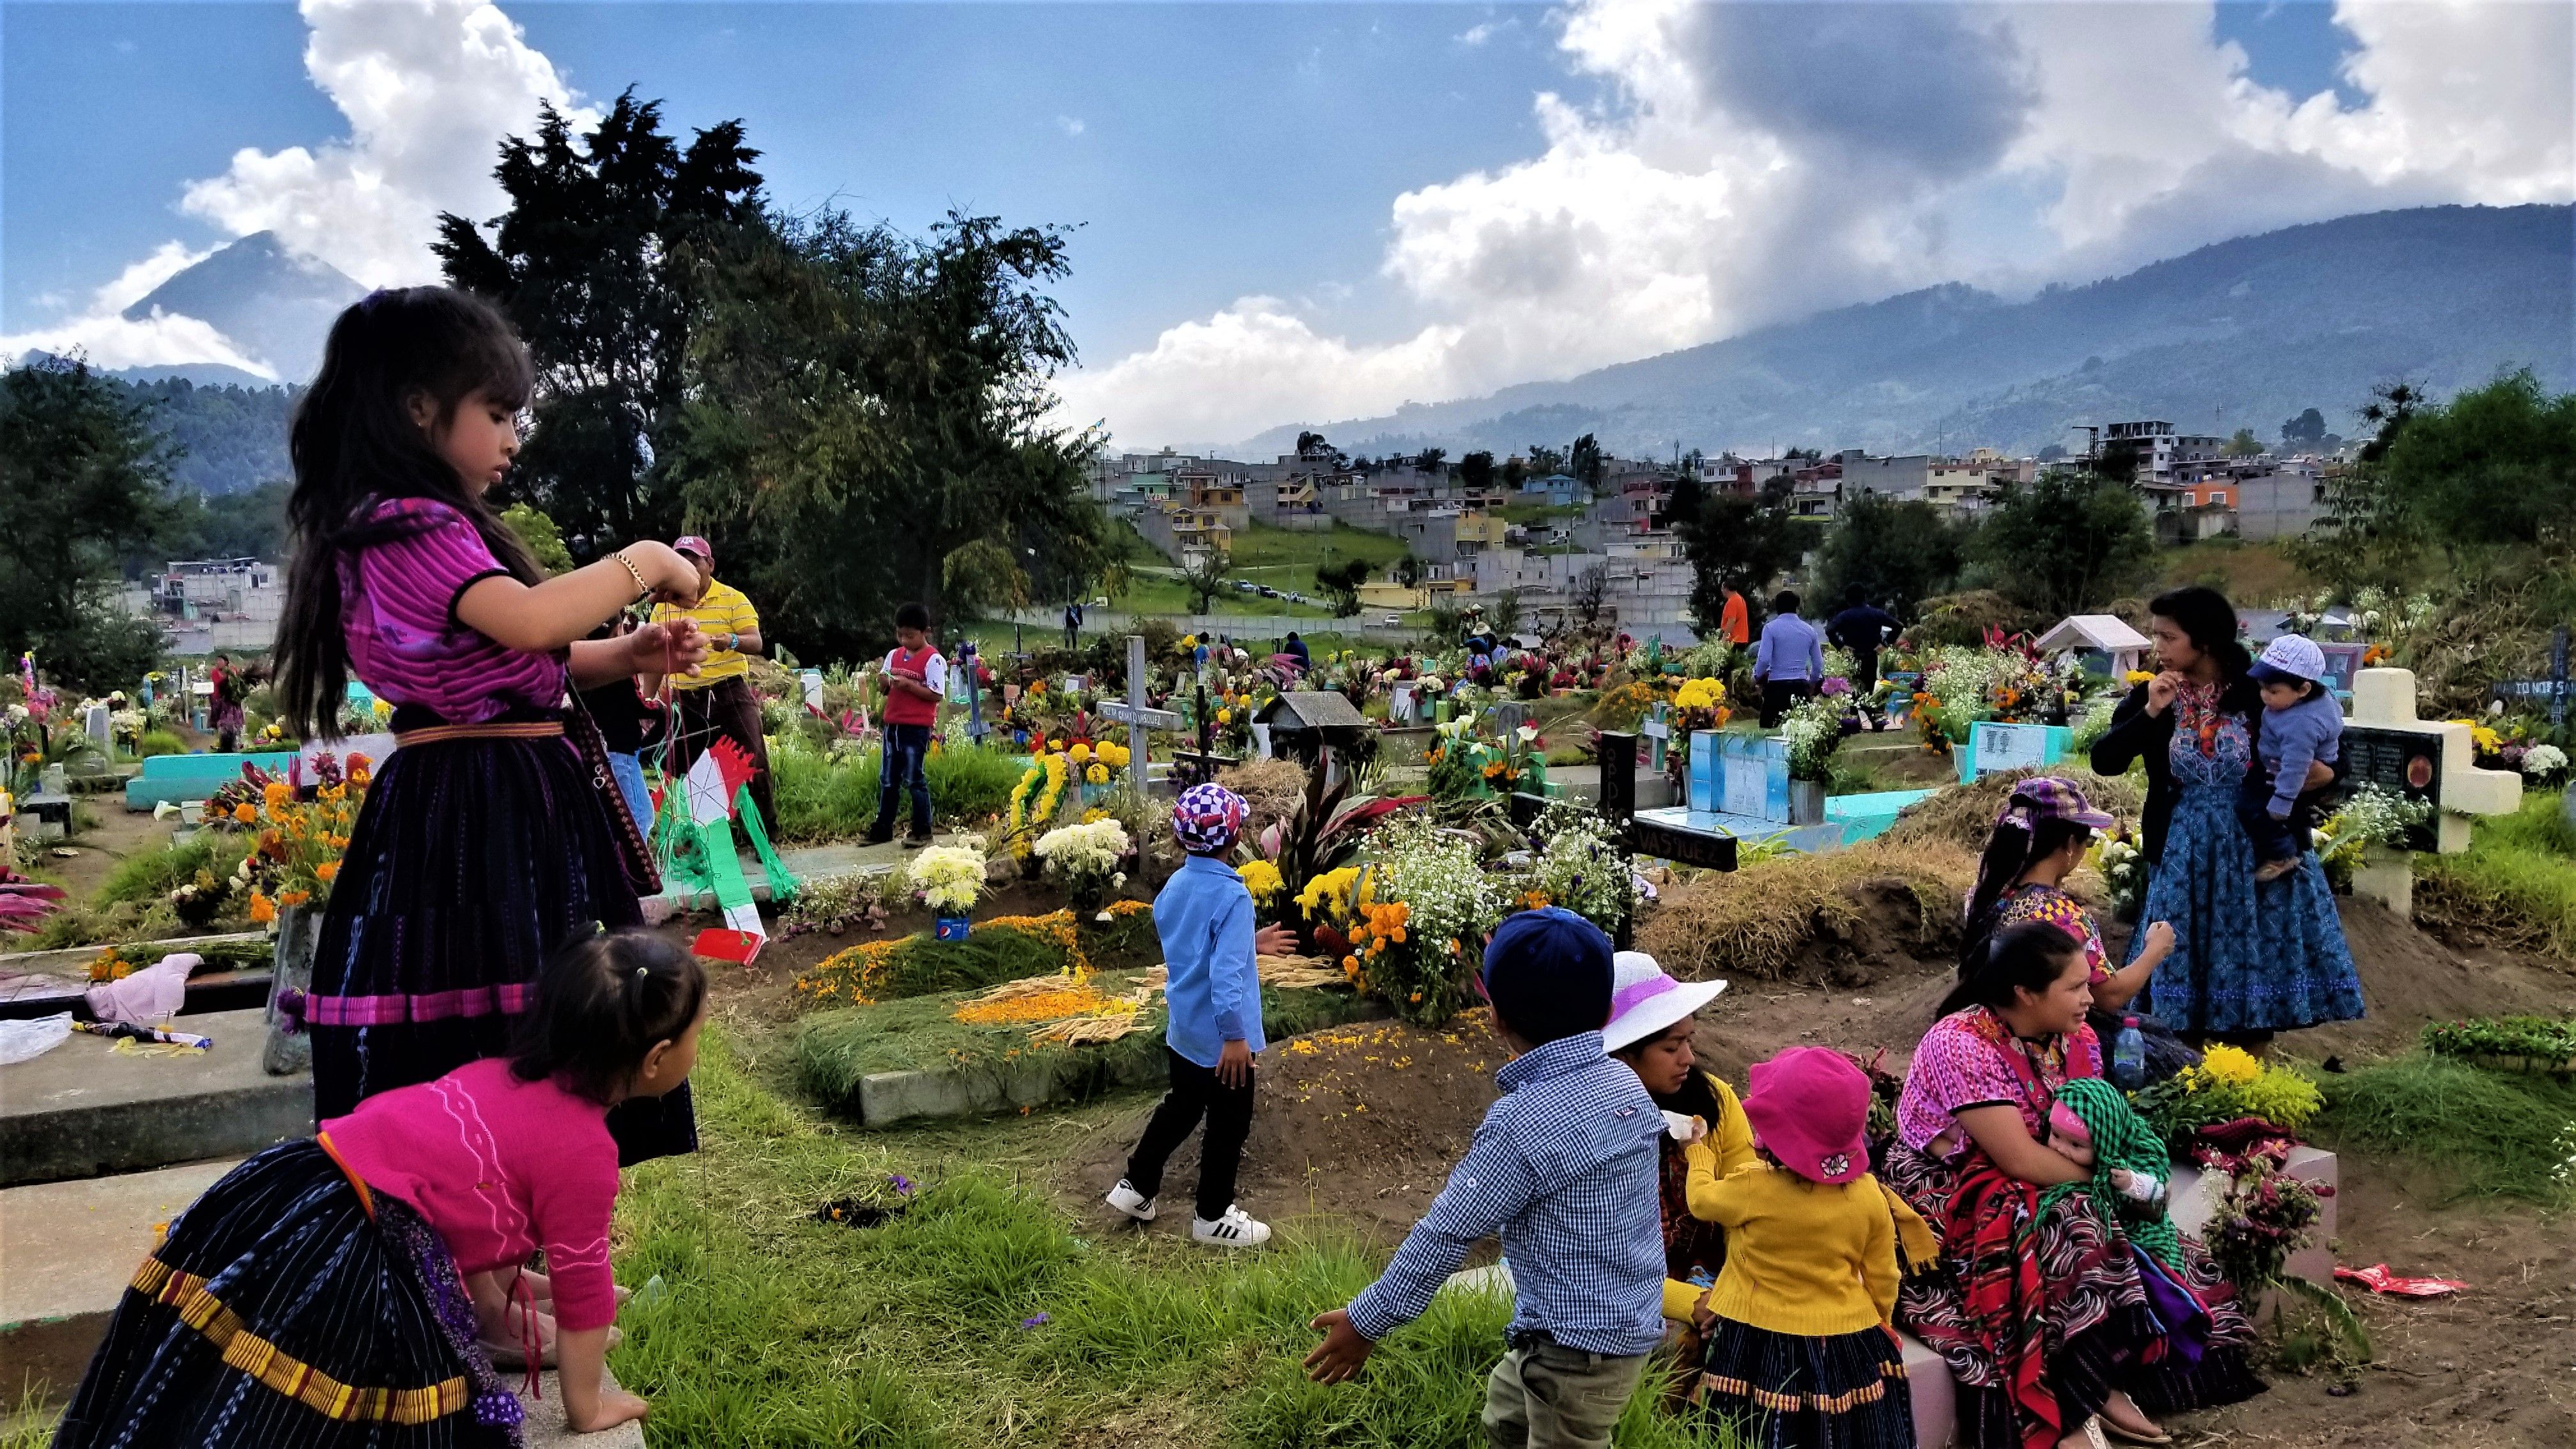 Local cemeteries come to life when families decorate the graves of their loved ones with candles, fresh cut grass, and flowers. For two days they pray, eat, and remember their ancestors in honor of Day of the Dead. Image by Kristian Hernandez. Guatemala, 2018.